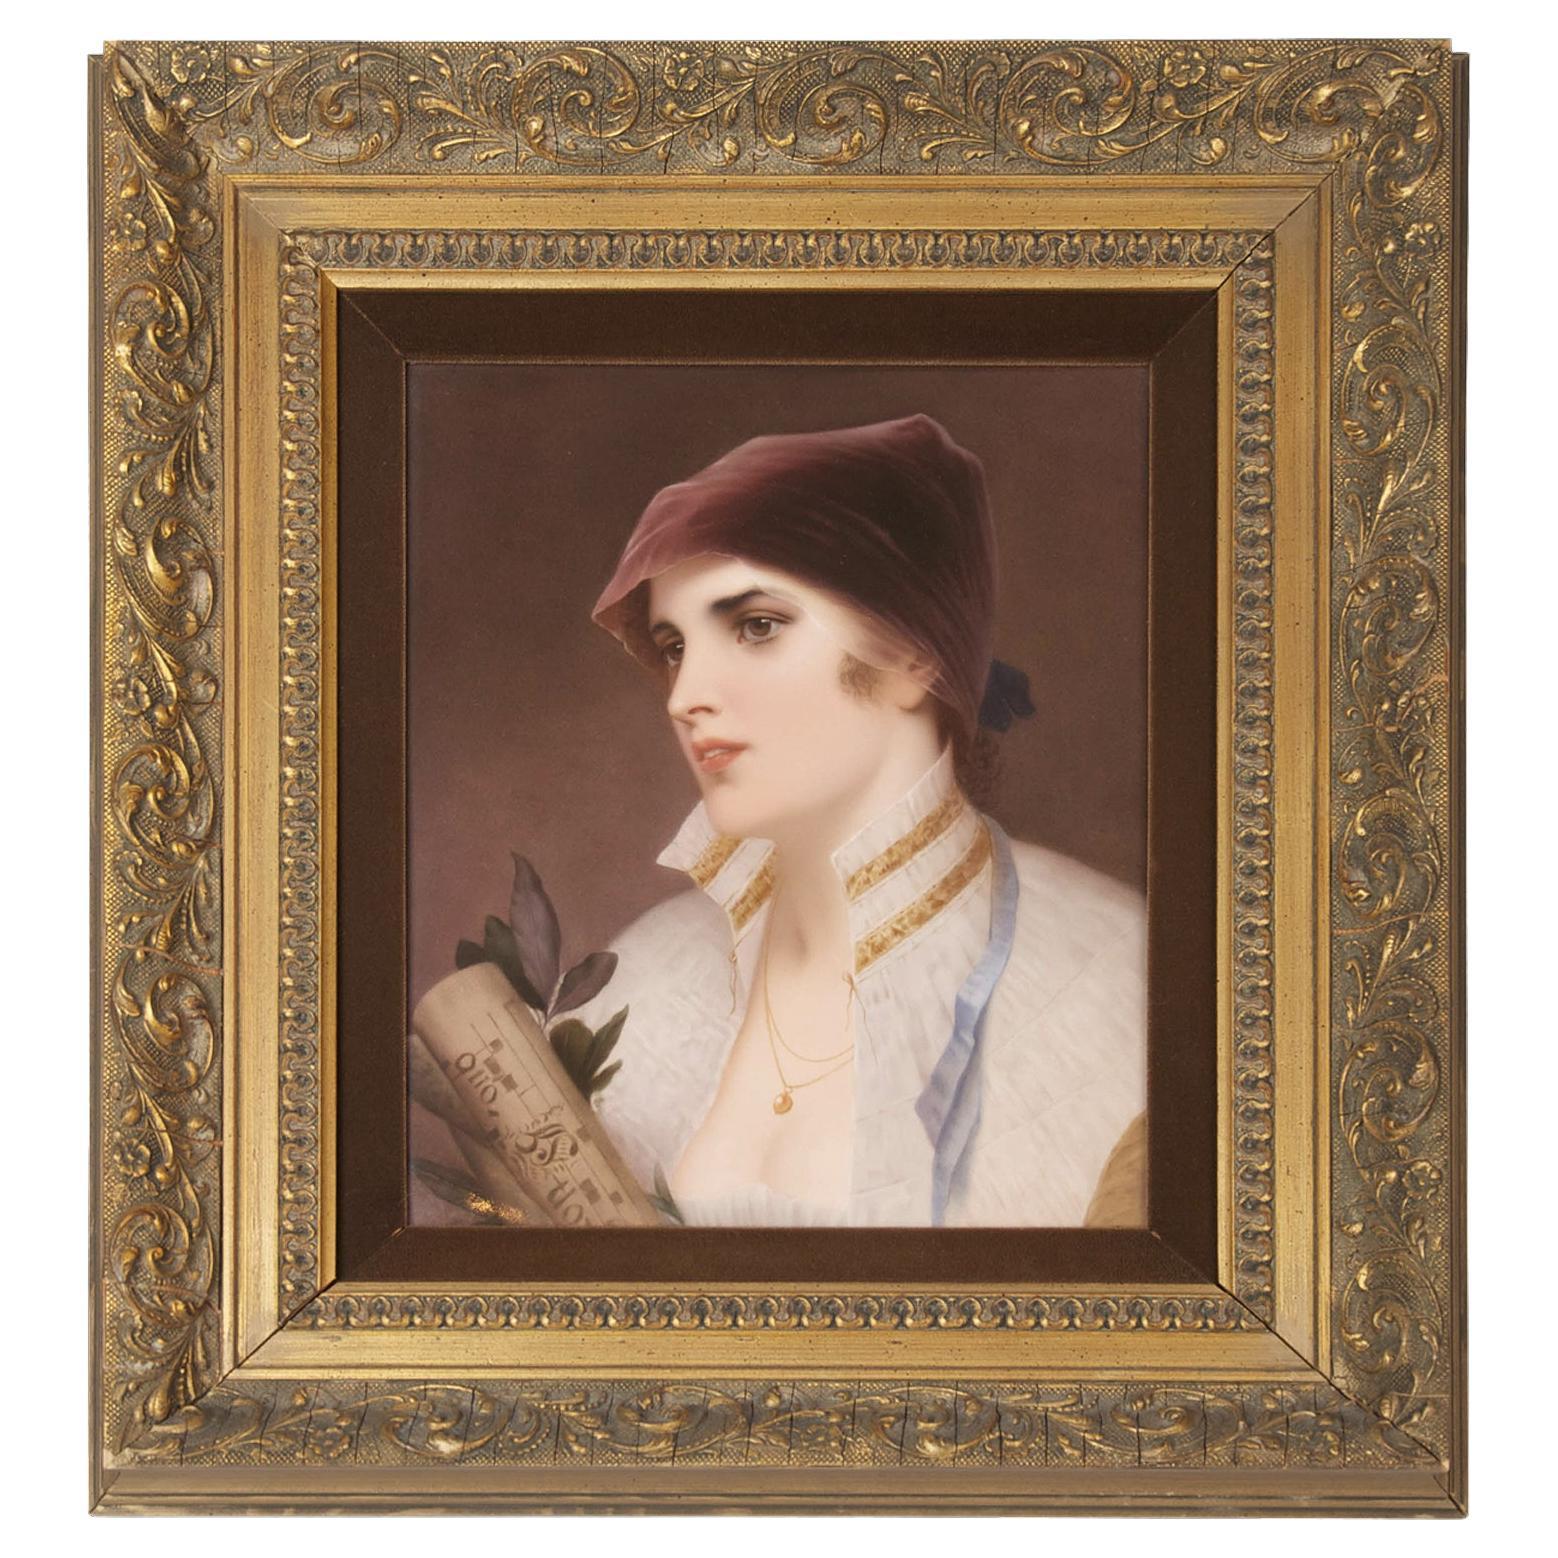 Berlin (KPM) Porcelain Plaque Of A Young Woman, In a Giltwood Frame